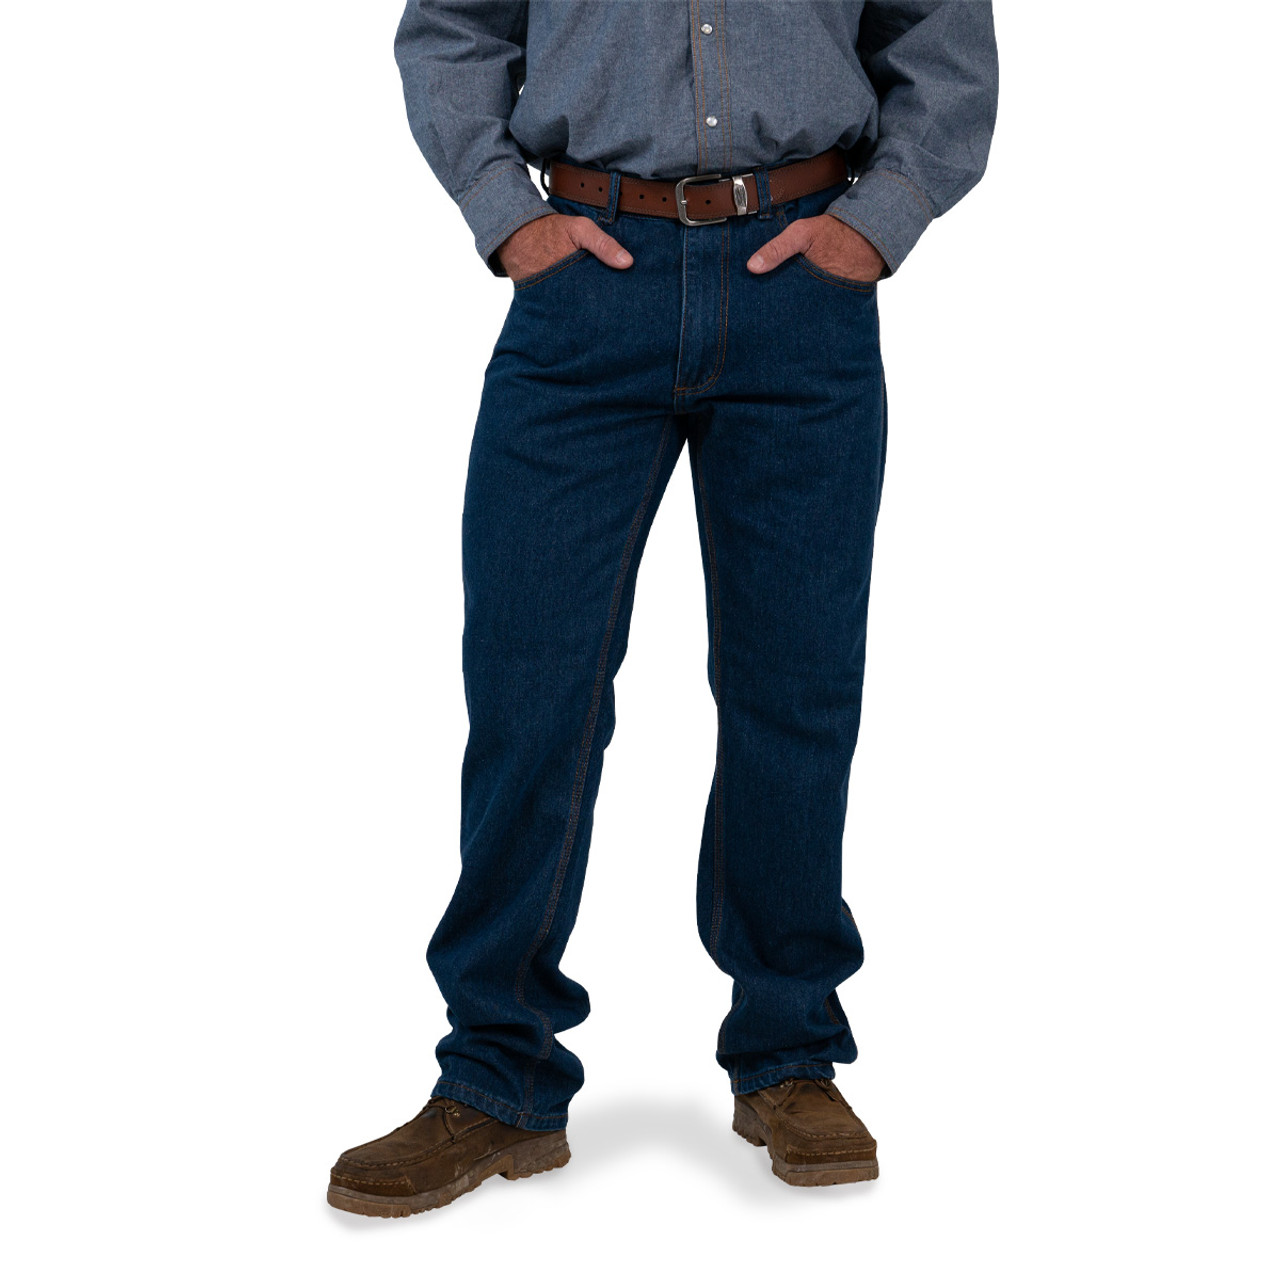 Cinch Boy's Jeans - Mid Rise / Relaxed Fit -Performance Denim - 8 - 18 -  Billy's Western Wear